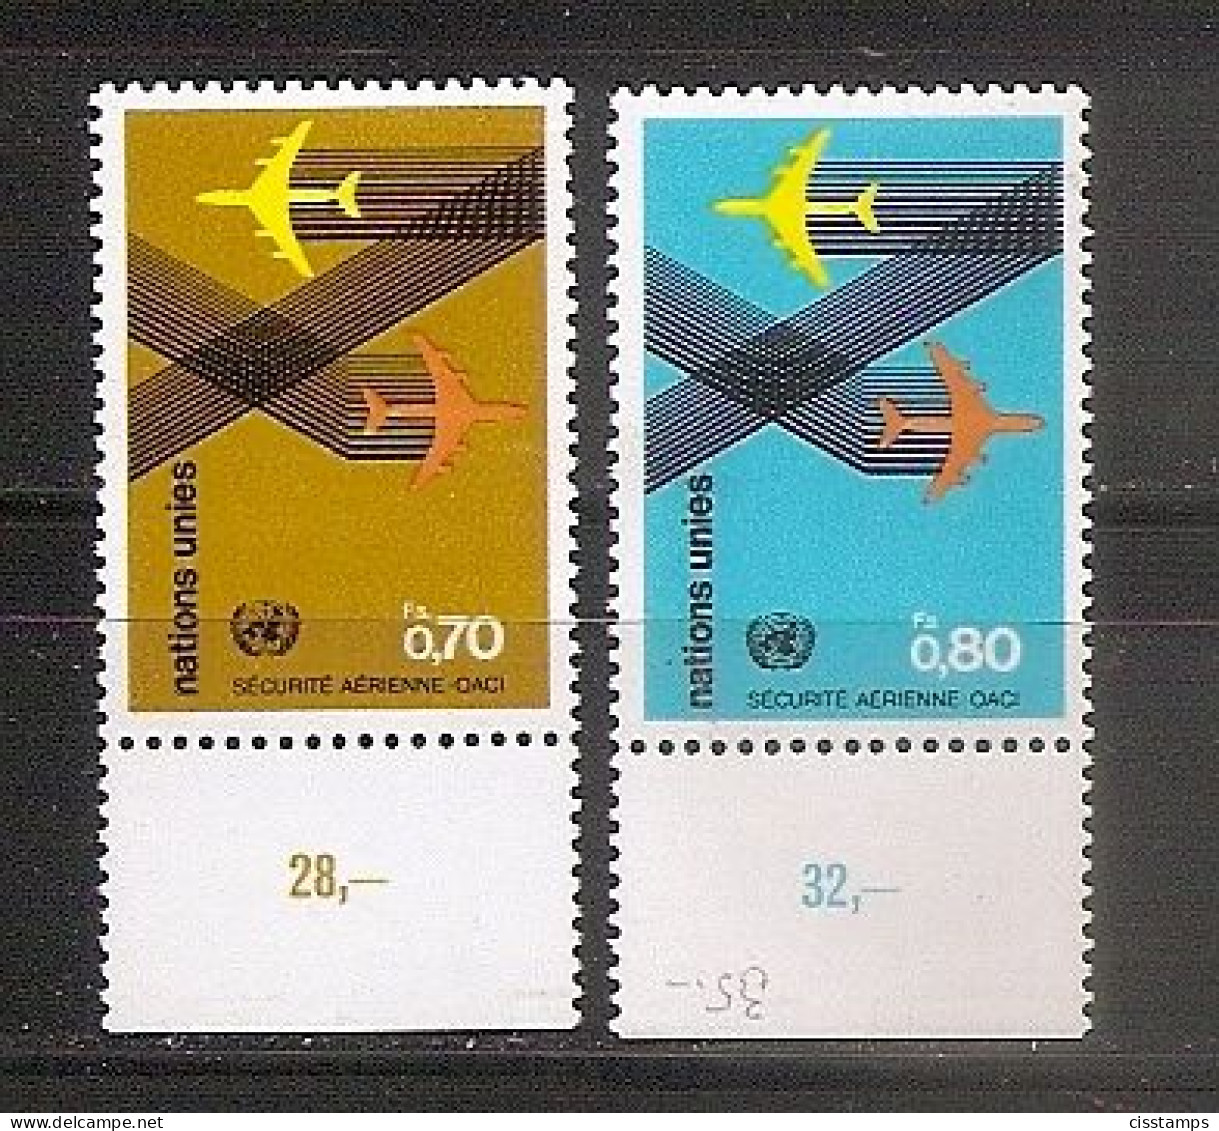 UNITED NATIONS GENEVA 1978●ICAO Safety In The Air●Mi 76-77●MNH - Neufs